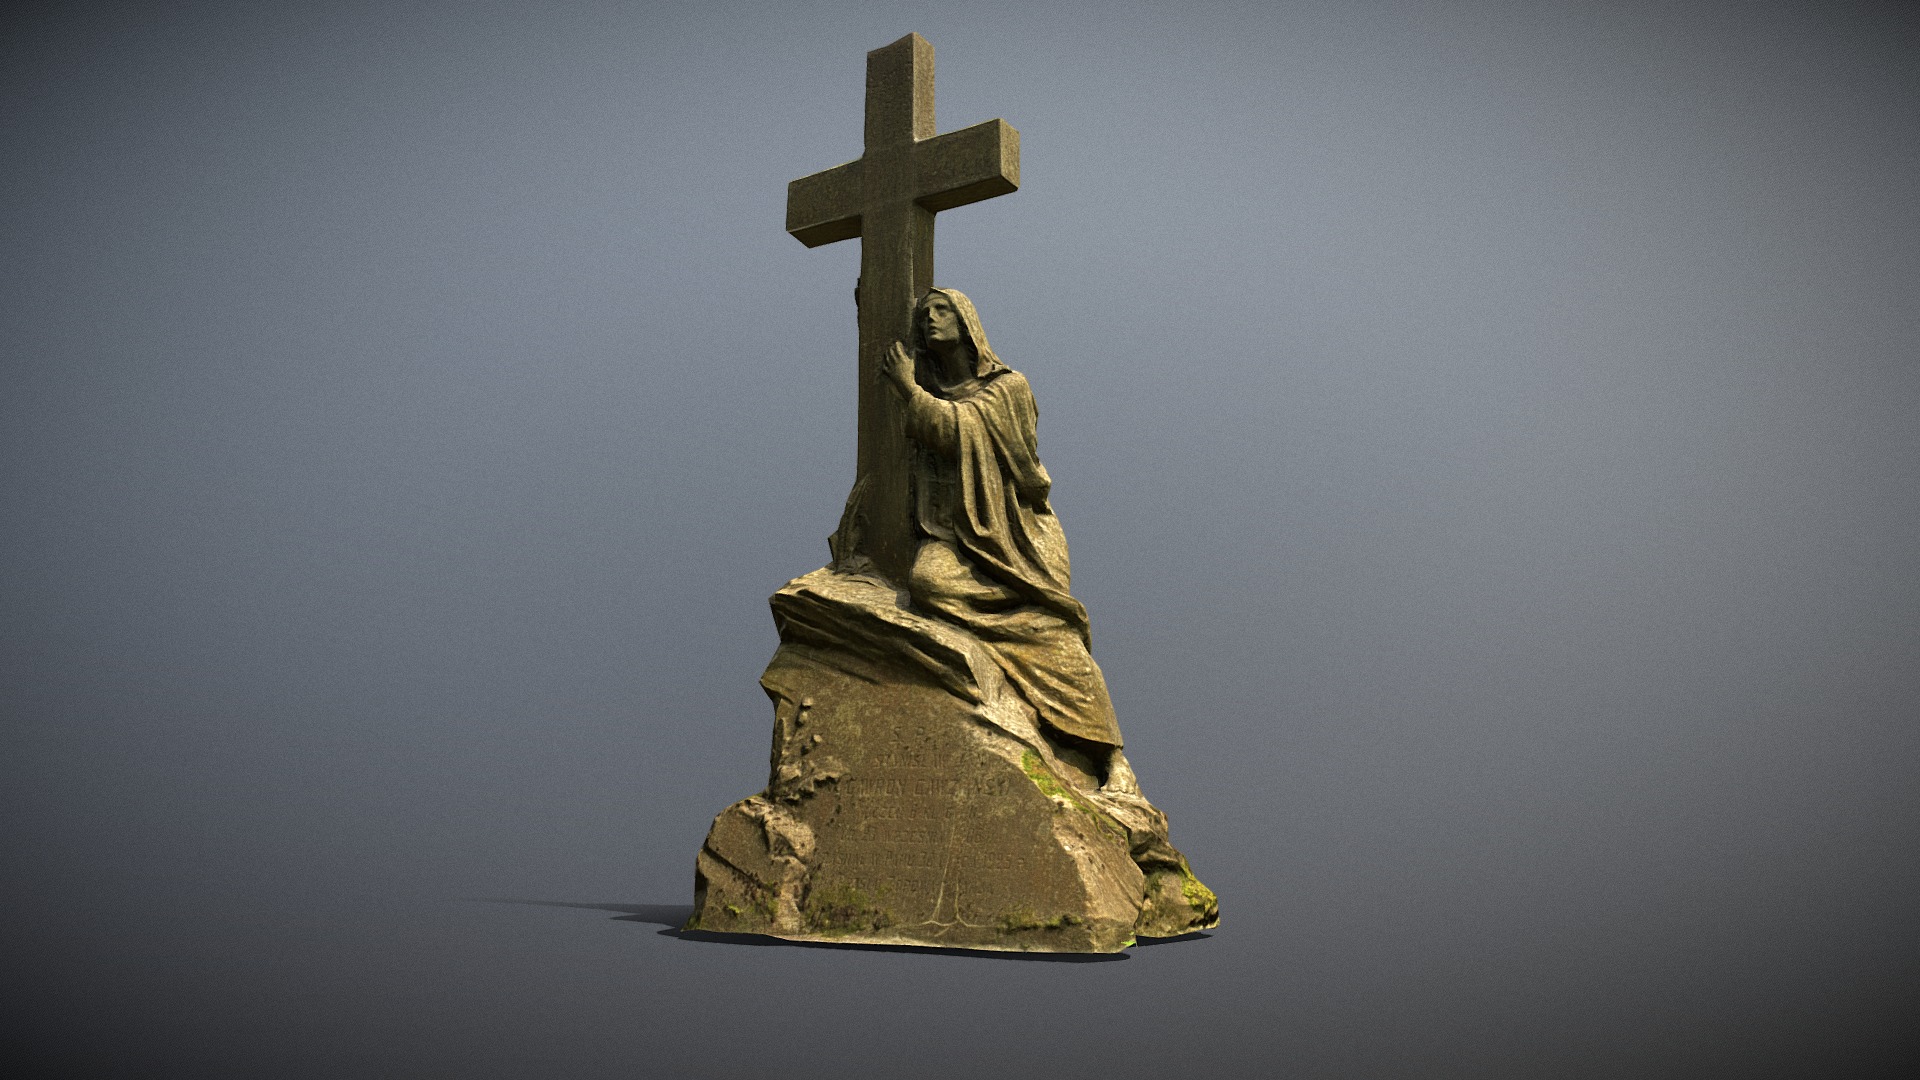 3D model Photorealistic scanned Mary sculpture LOD - This is a 3D model of the Photorealistic scanned Mary sculpture LOD. The 3D model is about a statue of a person holding a cross.